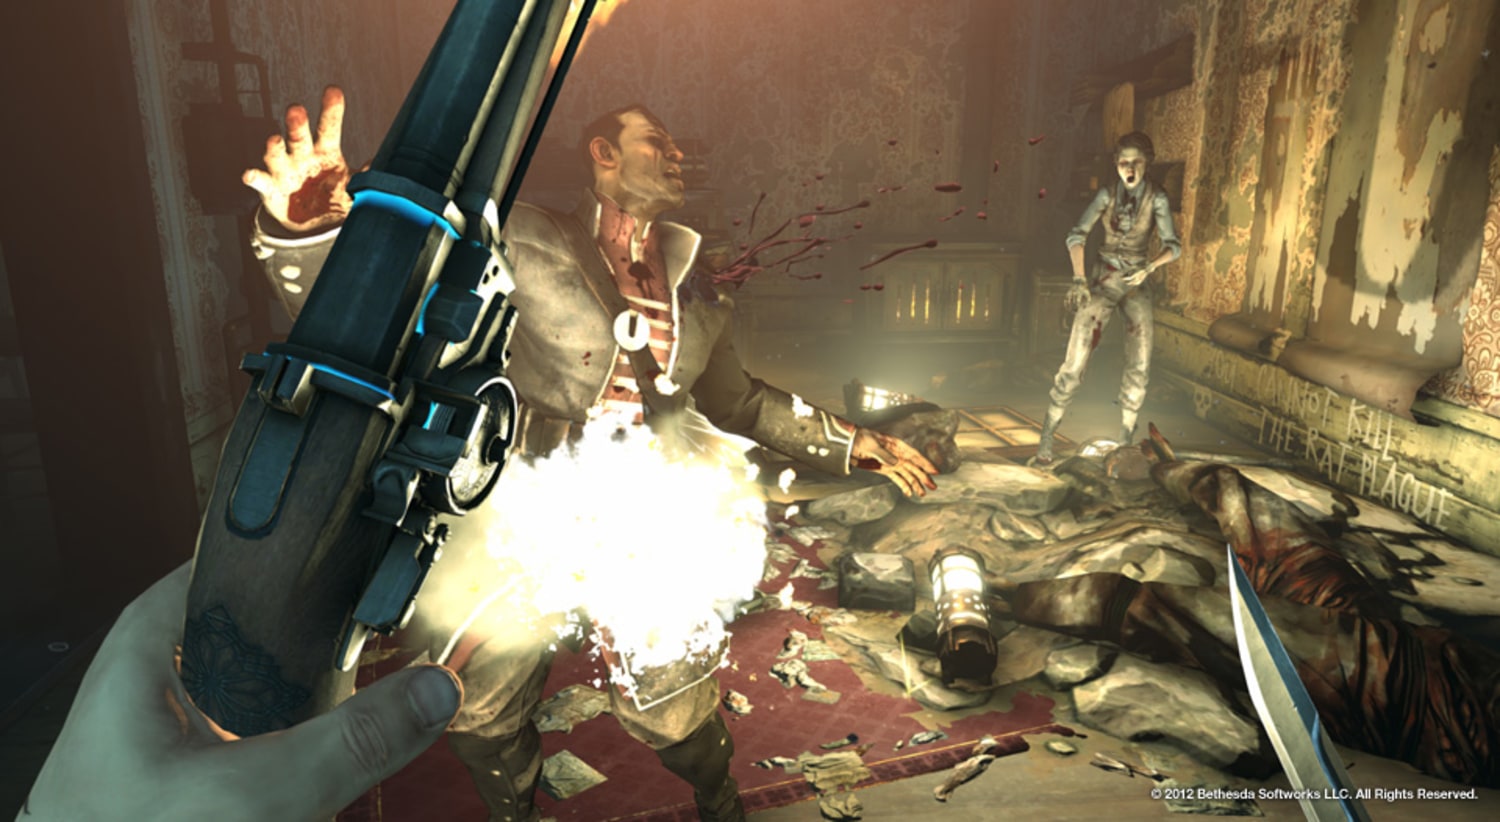 10 tips for playing 'Dishonored' without shedding a drop of blood